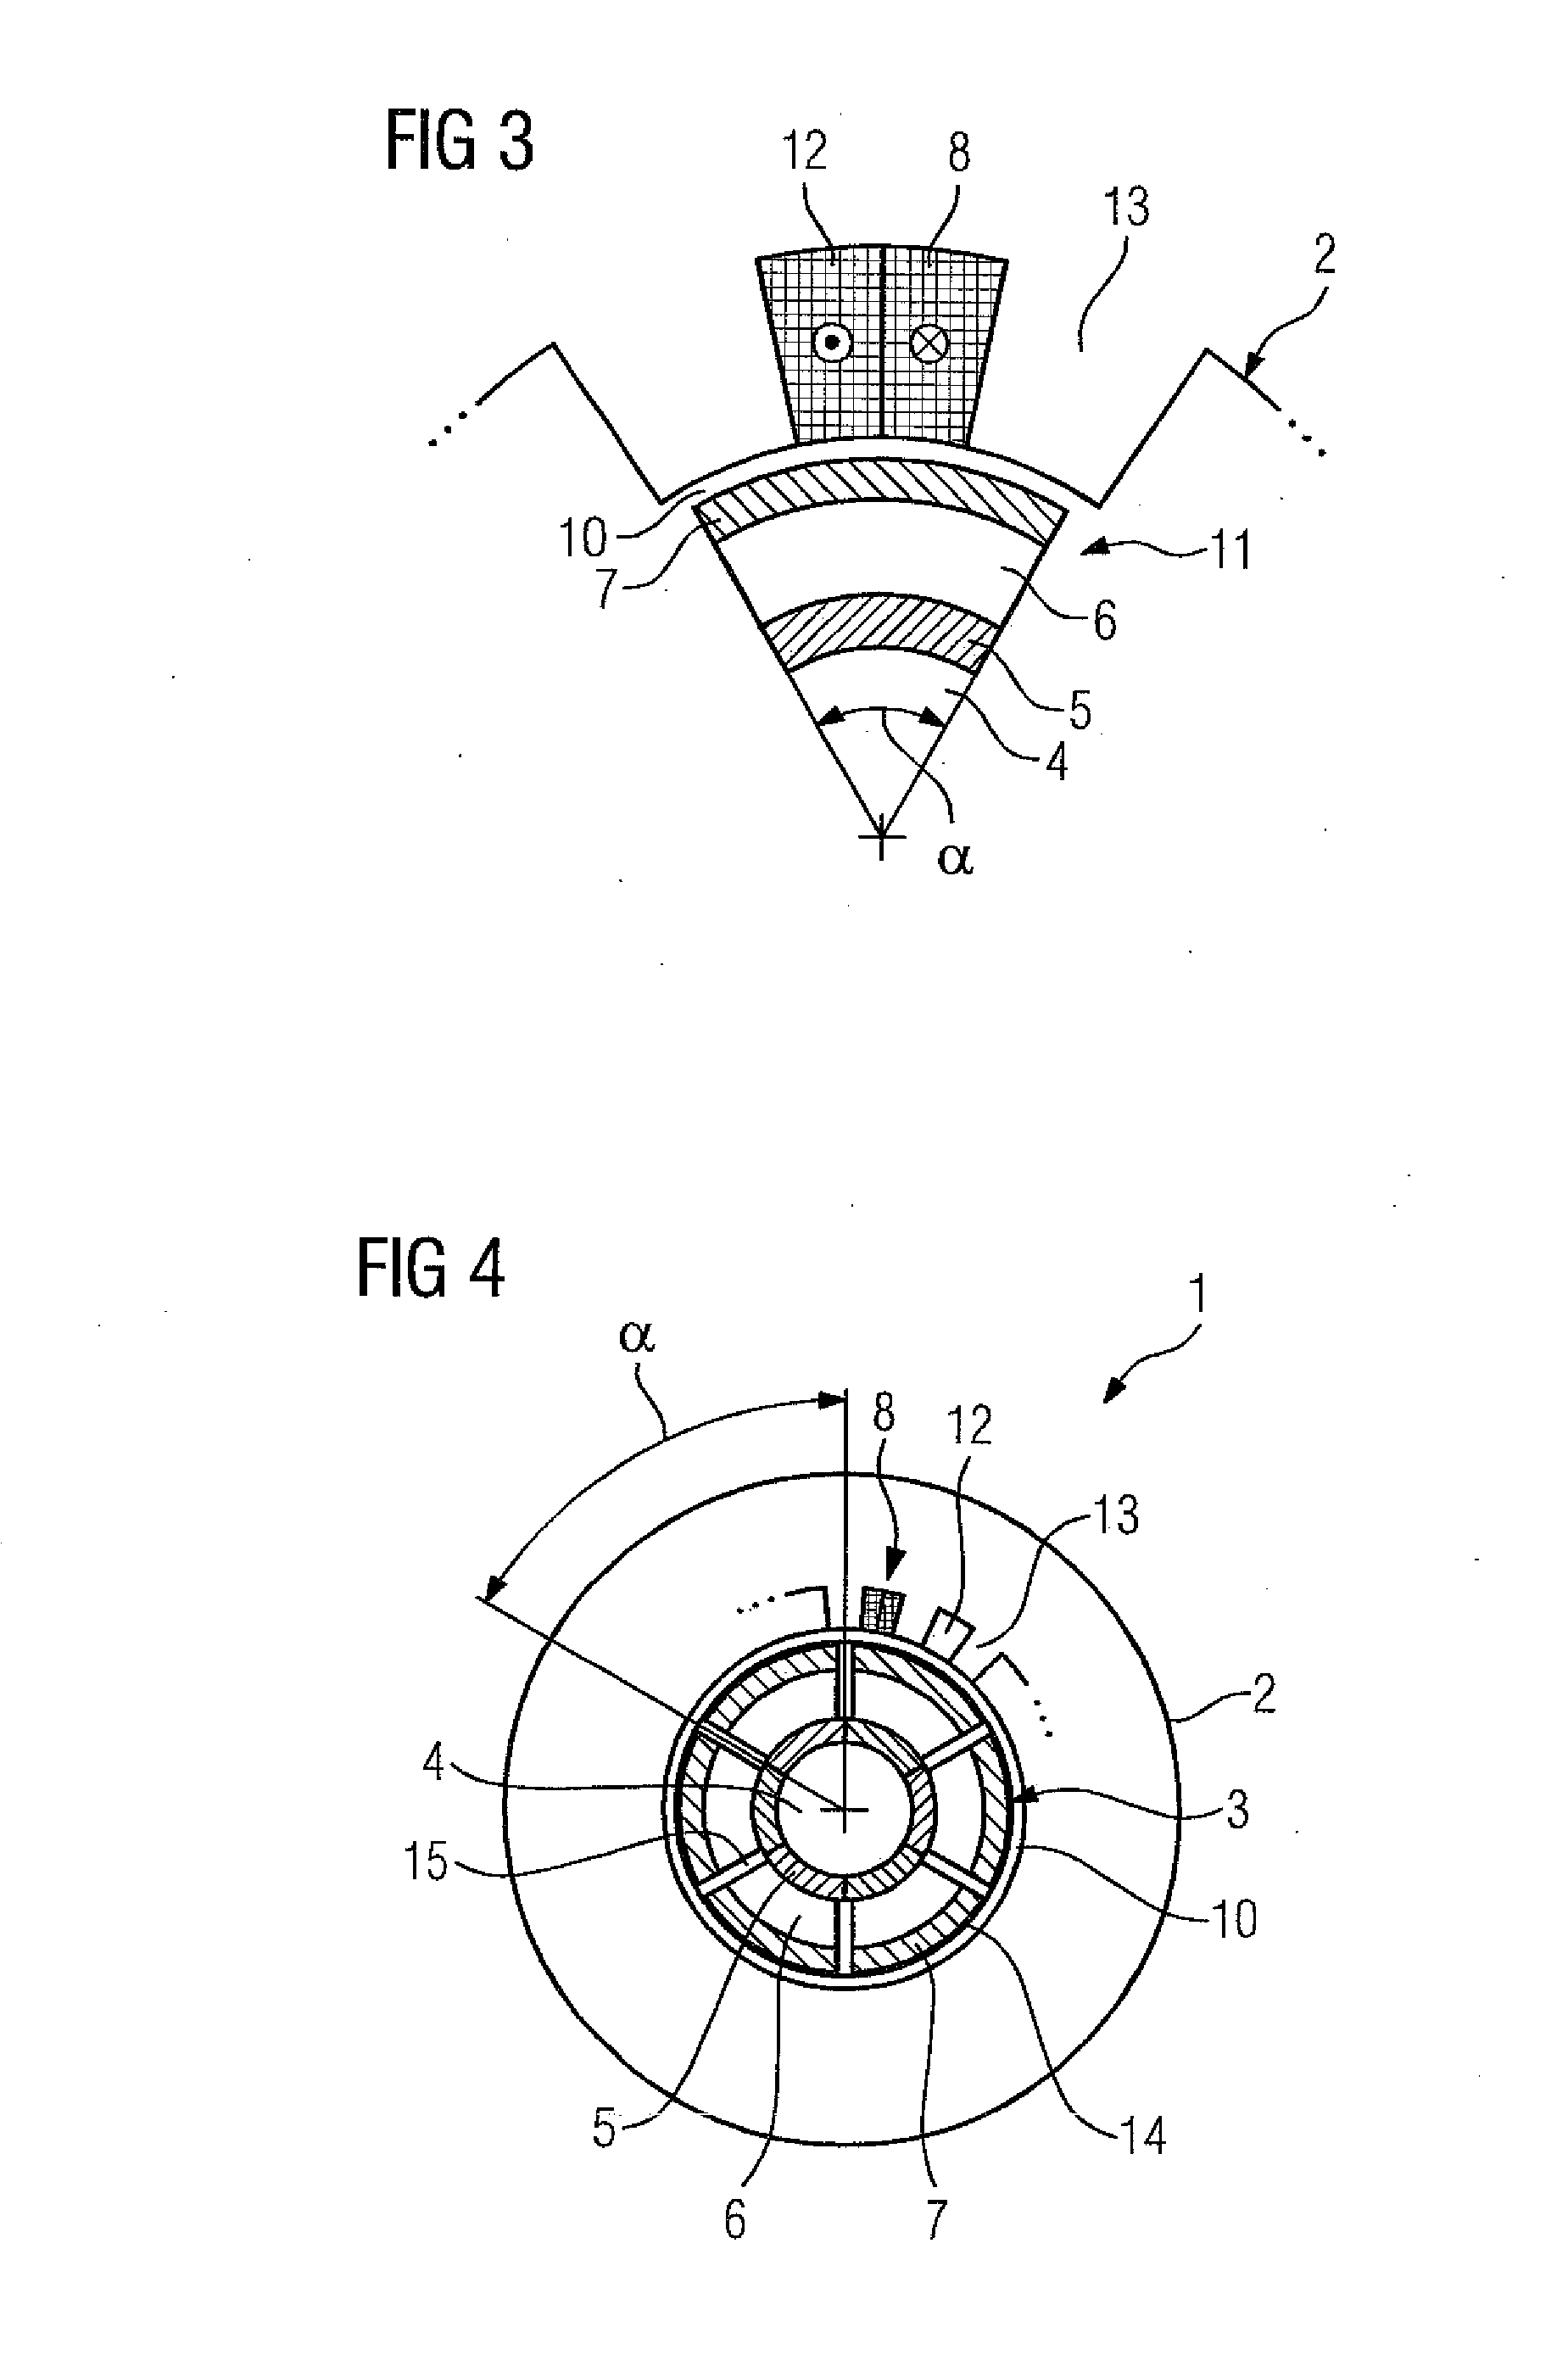 Permanently excited synchronous machine with ferrite magnets